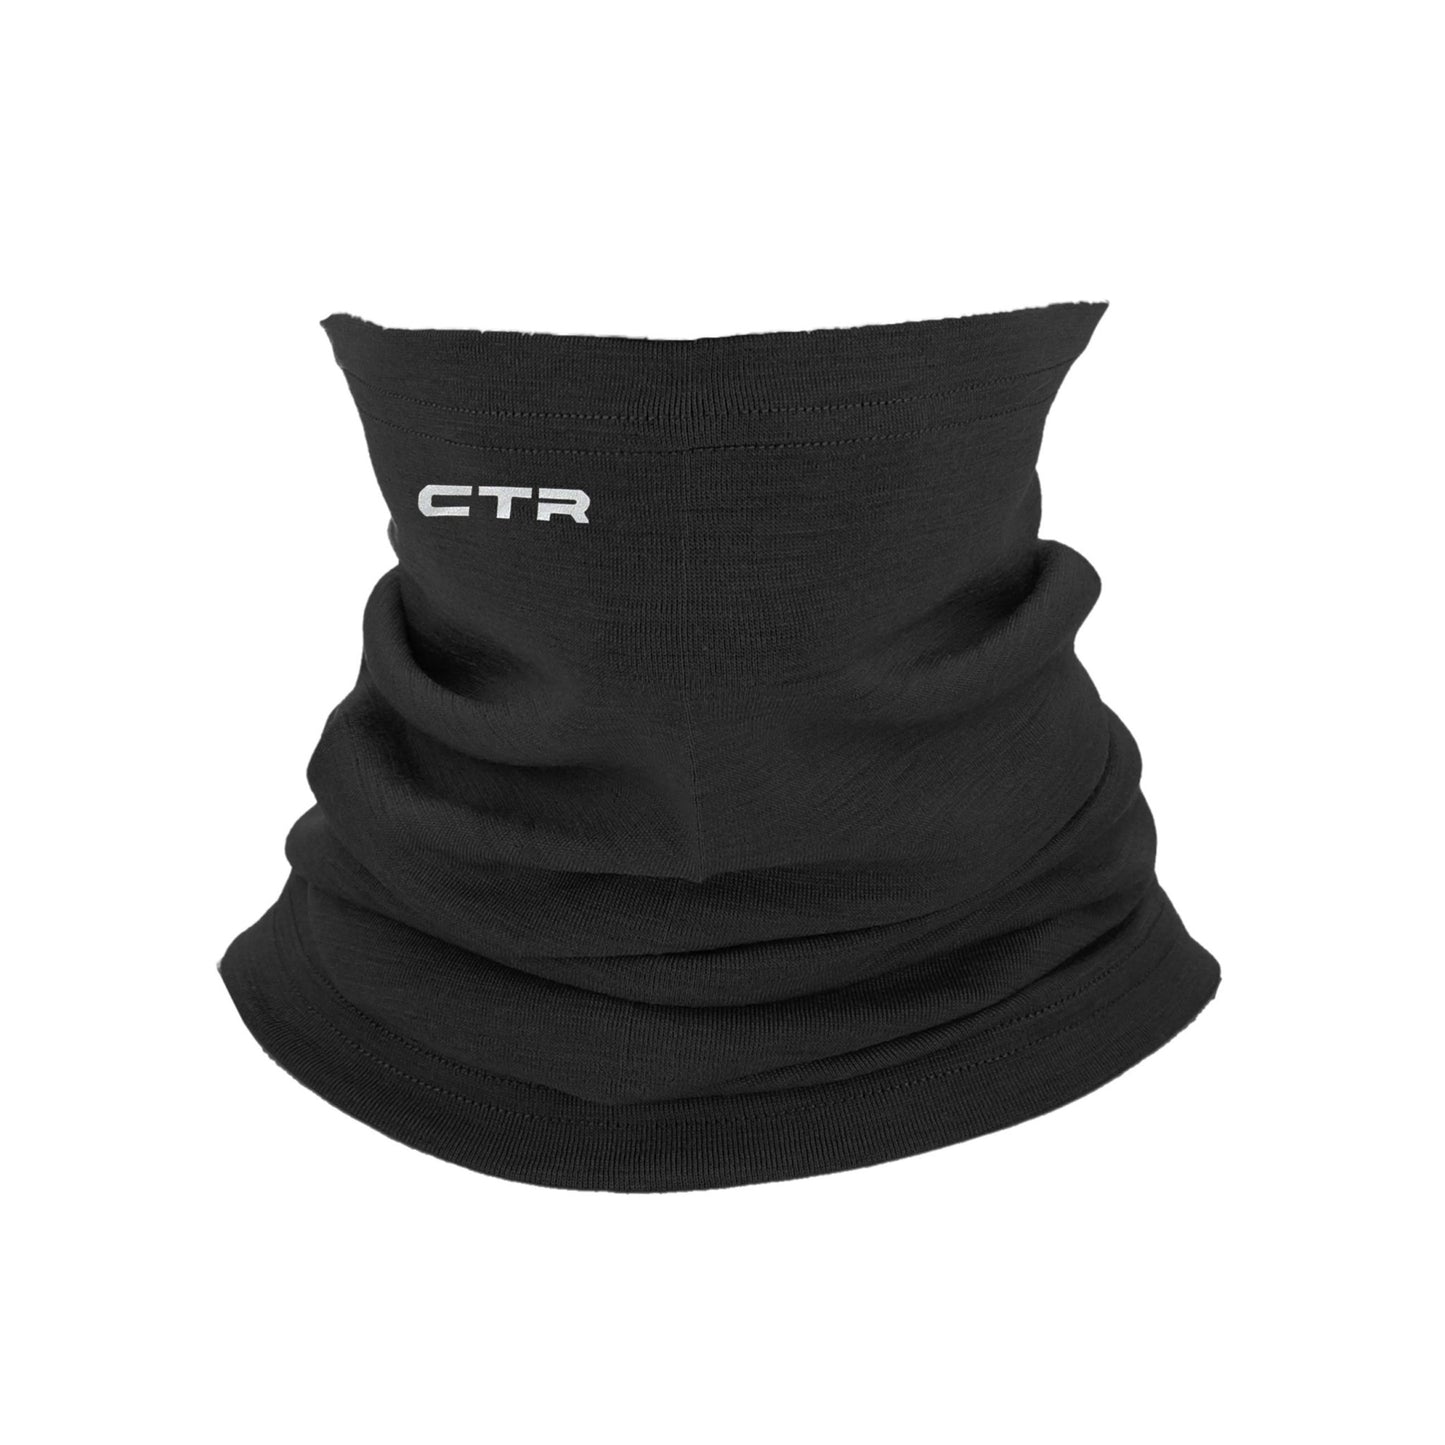 Suelo PURE Gaiter Style:1703 - CTR Outdoors